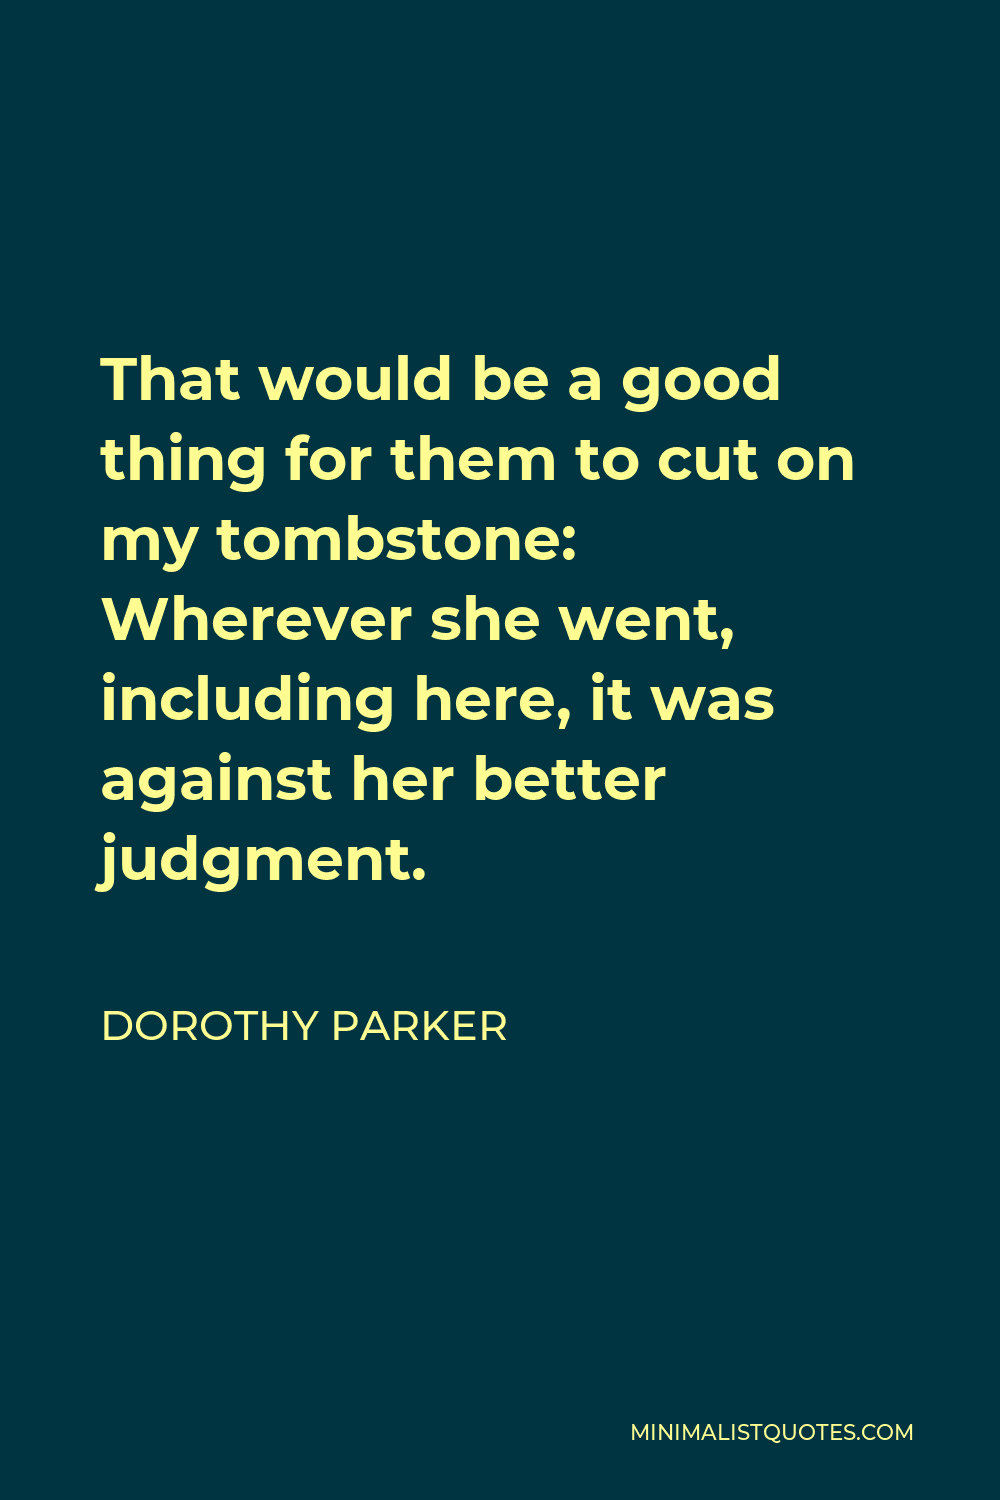 Dorothy Parker Quote - That would be a good thing for them to cut on my tombstone: Wherever she went, including here, it was against her better judgment.